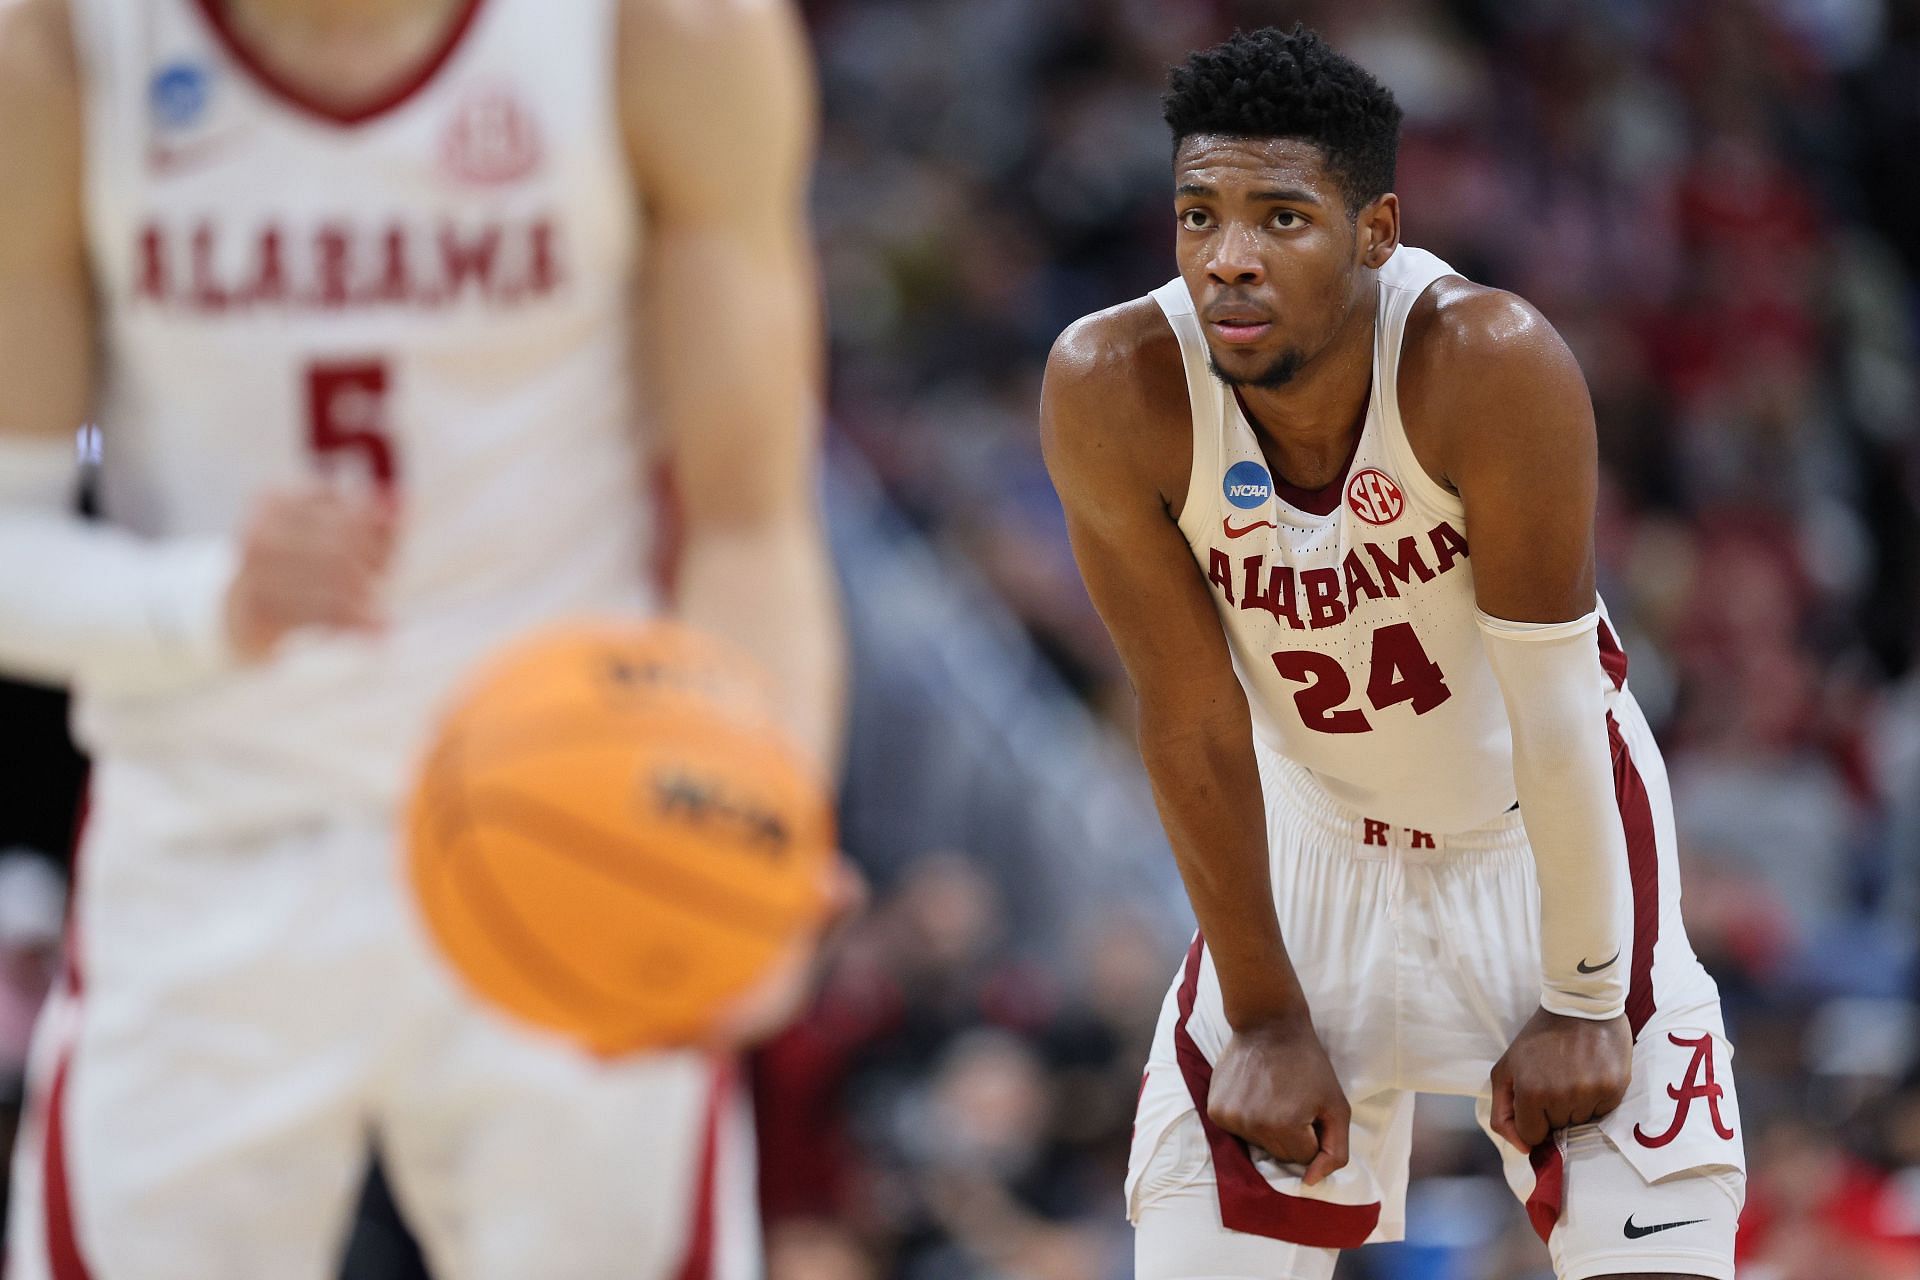 Brandon Miller will likely be a lottery pick in the 2023 NBA draft (Image via Getty Images)